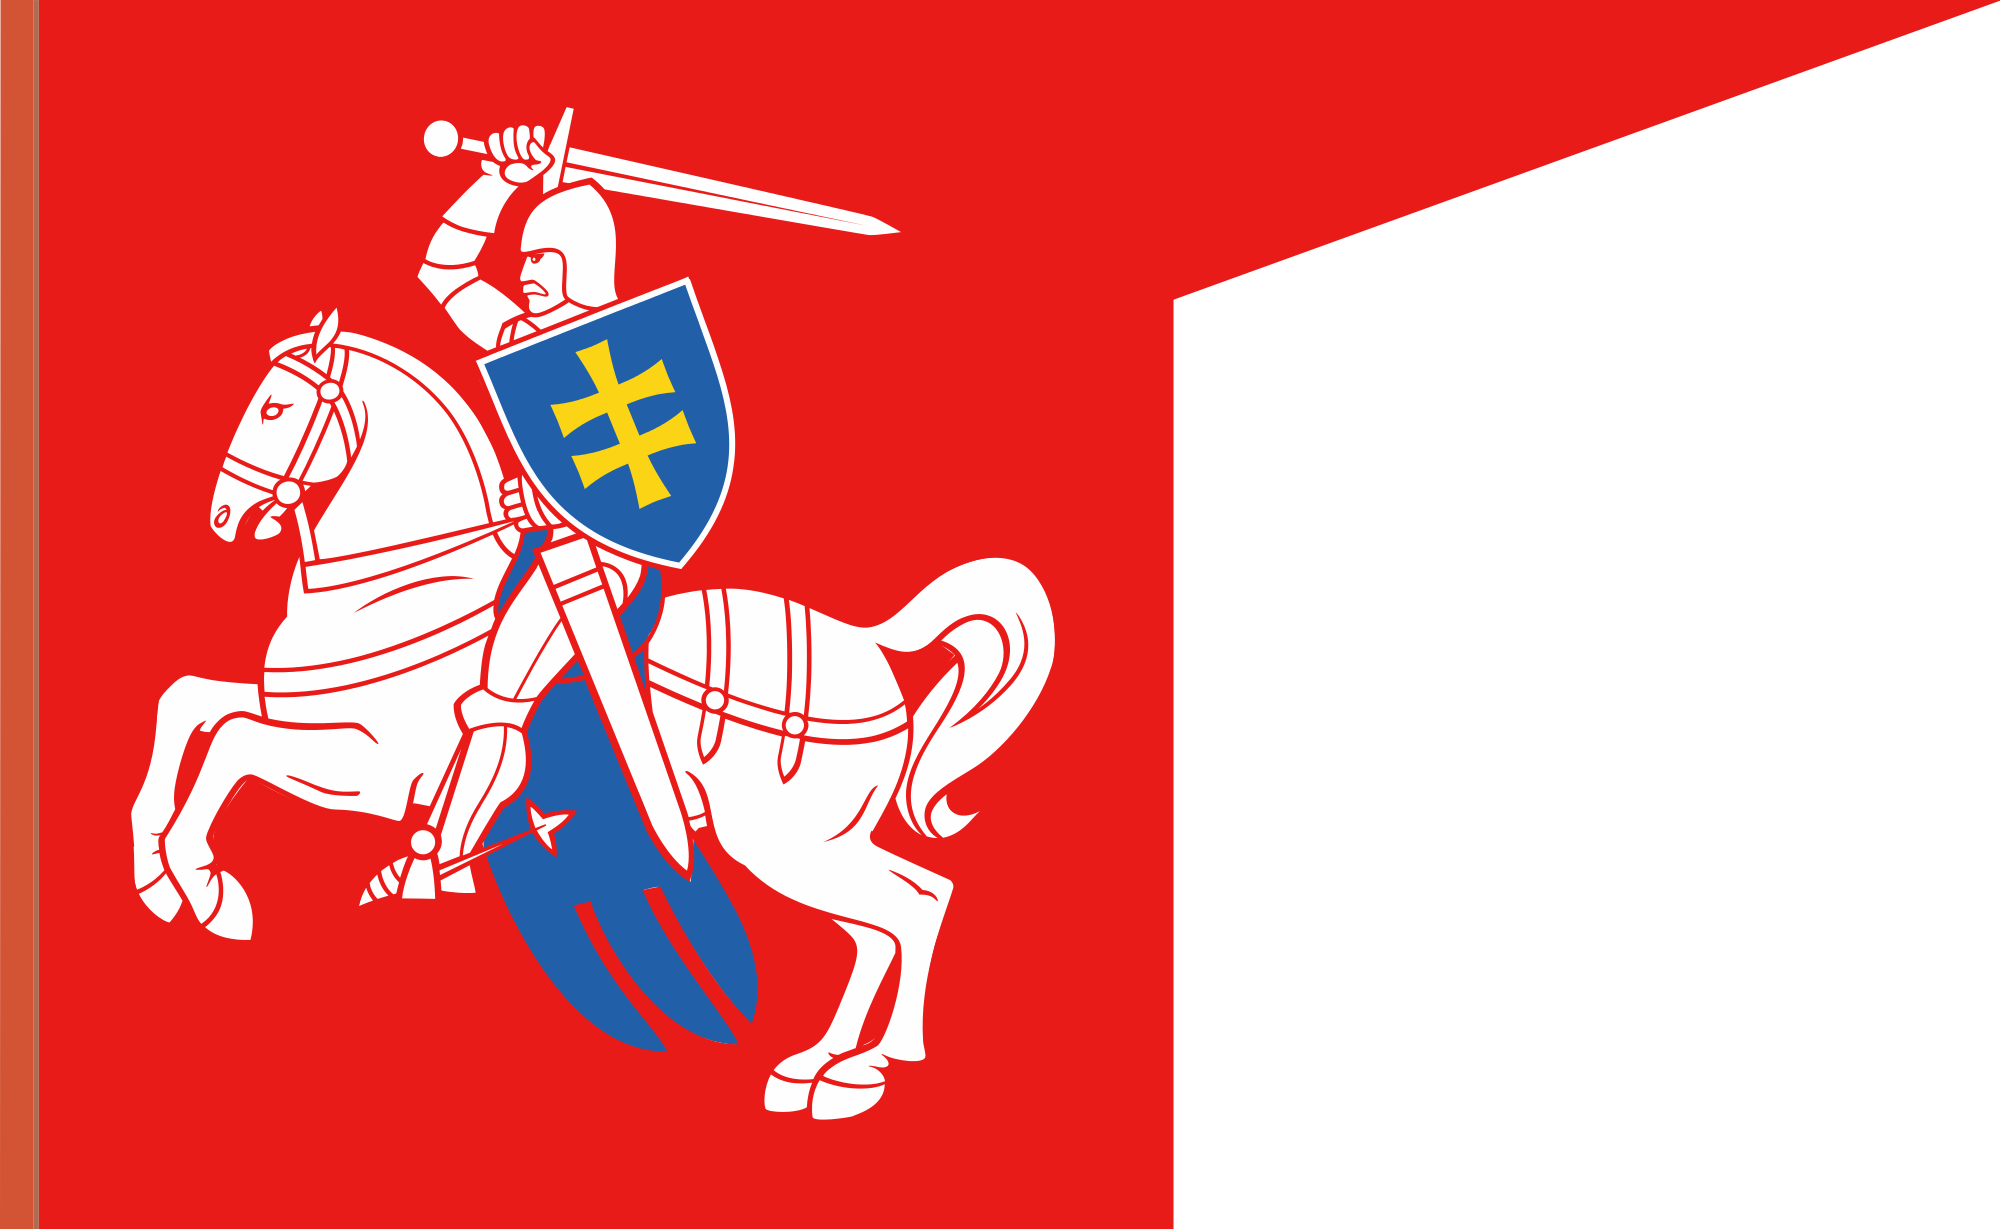 A Red And White Flag With A Knight Holding A Sword And A Shield